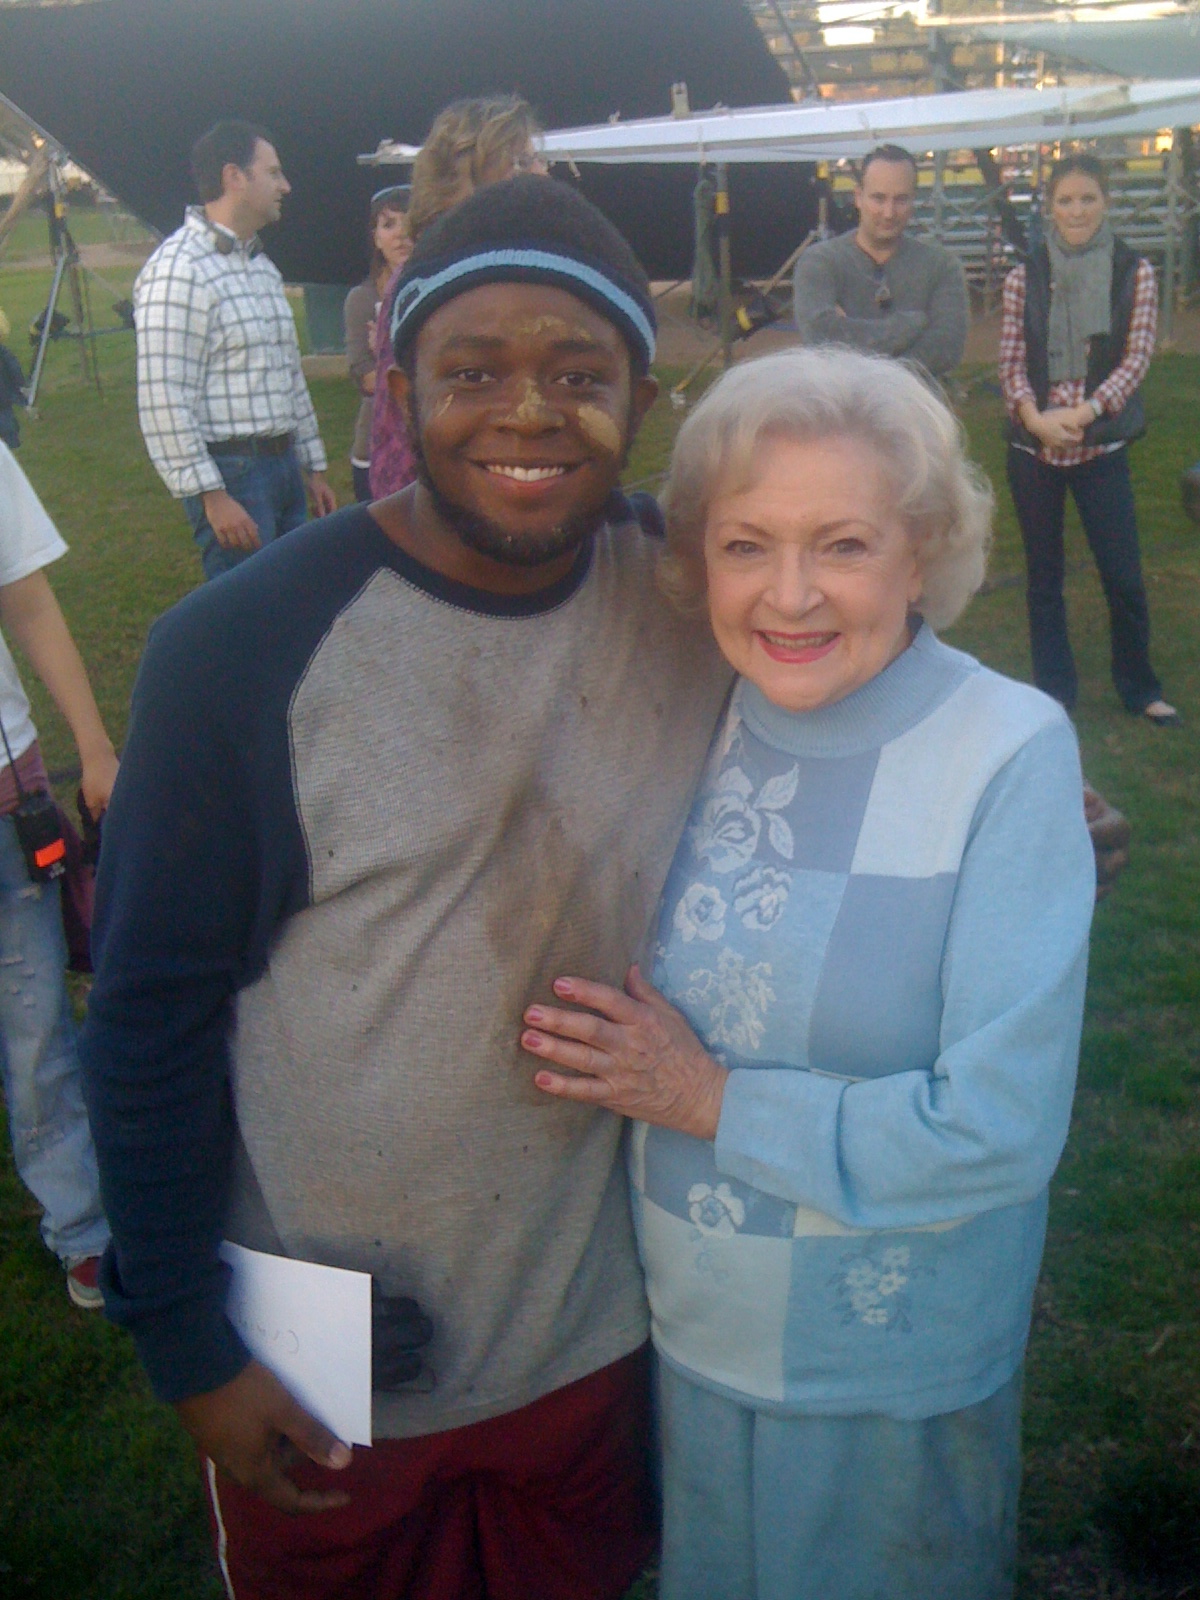 Snickers Commercial with Betty White!